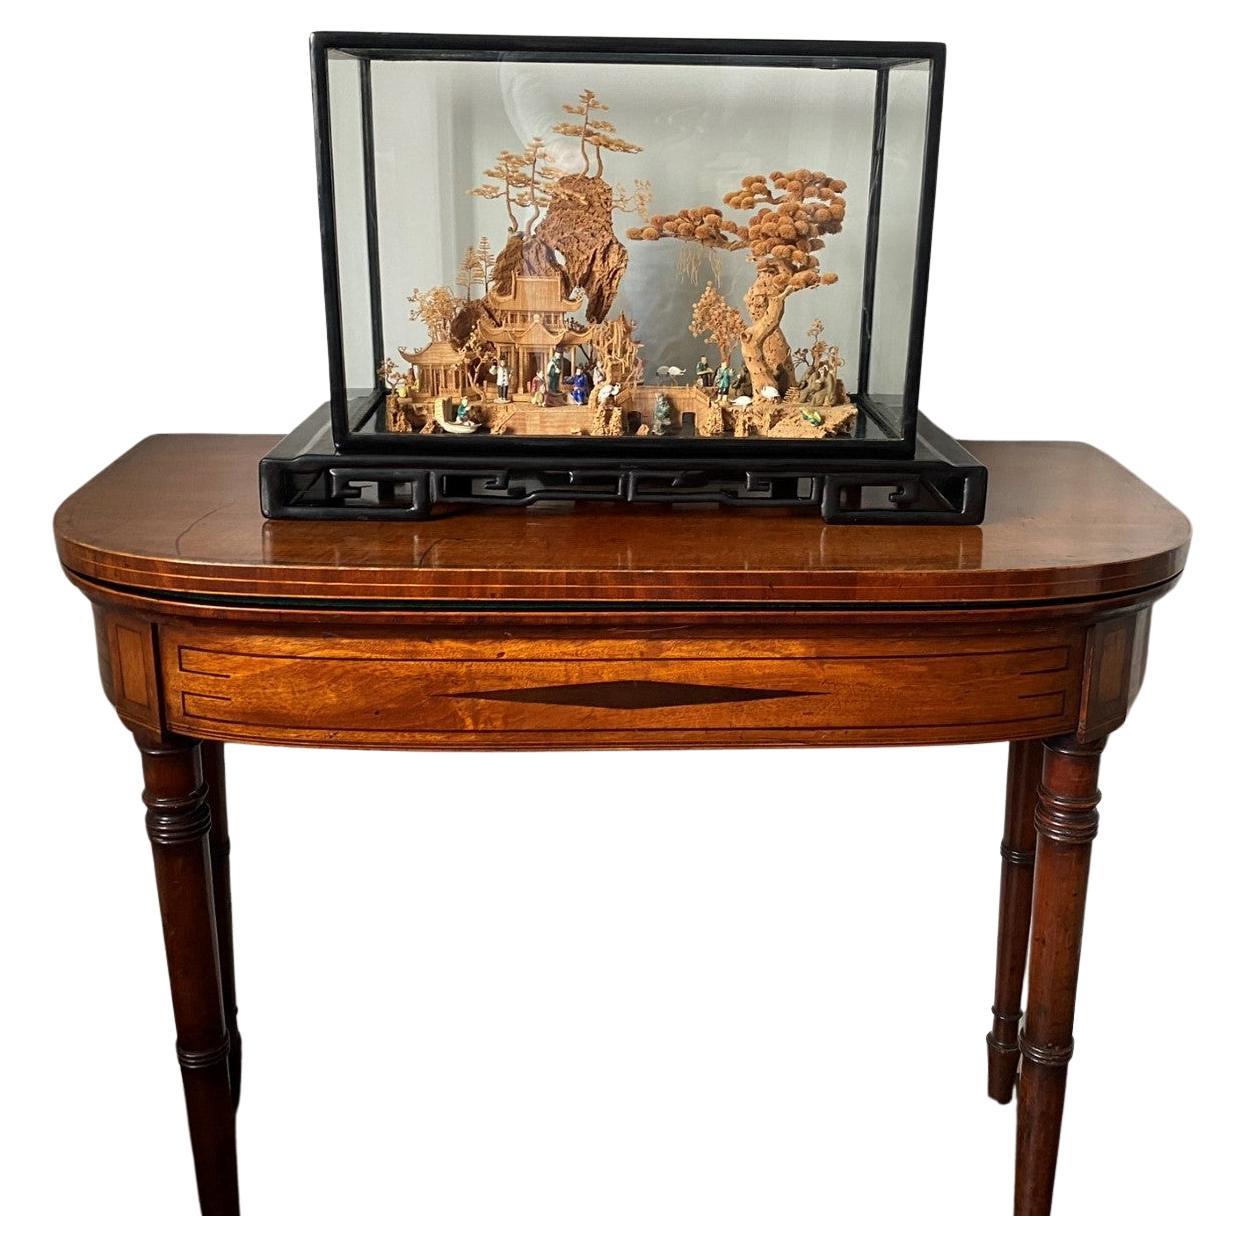 Large Scale Antique Chinese Carved Cork Diorama in Ebonised Glass Display Case For Sale